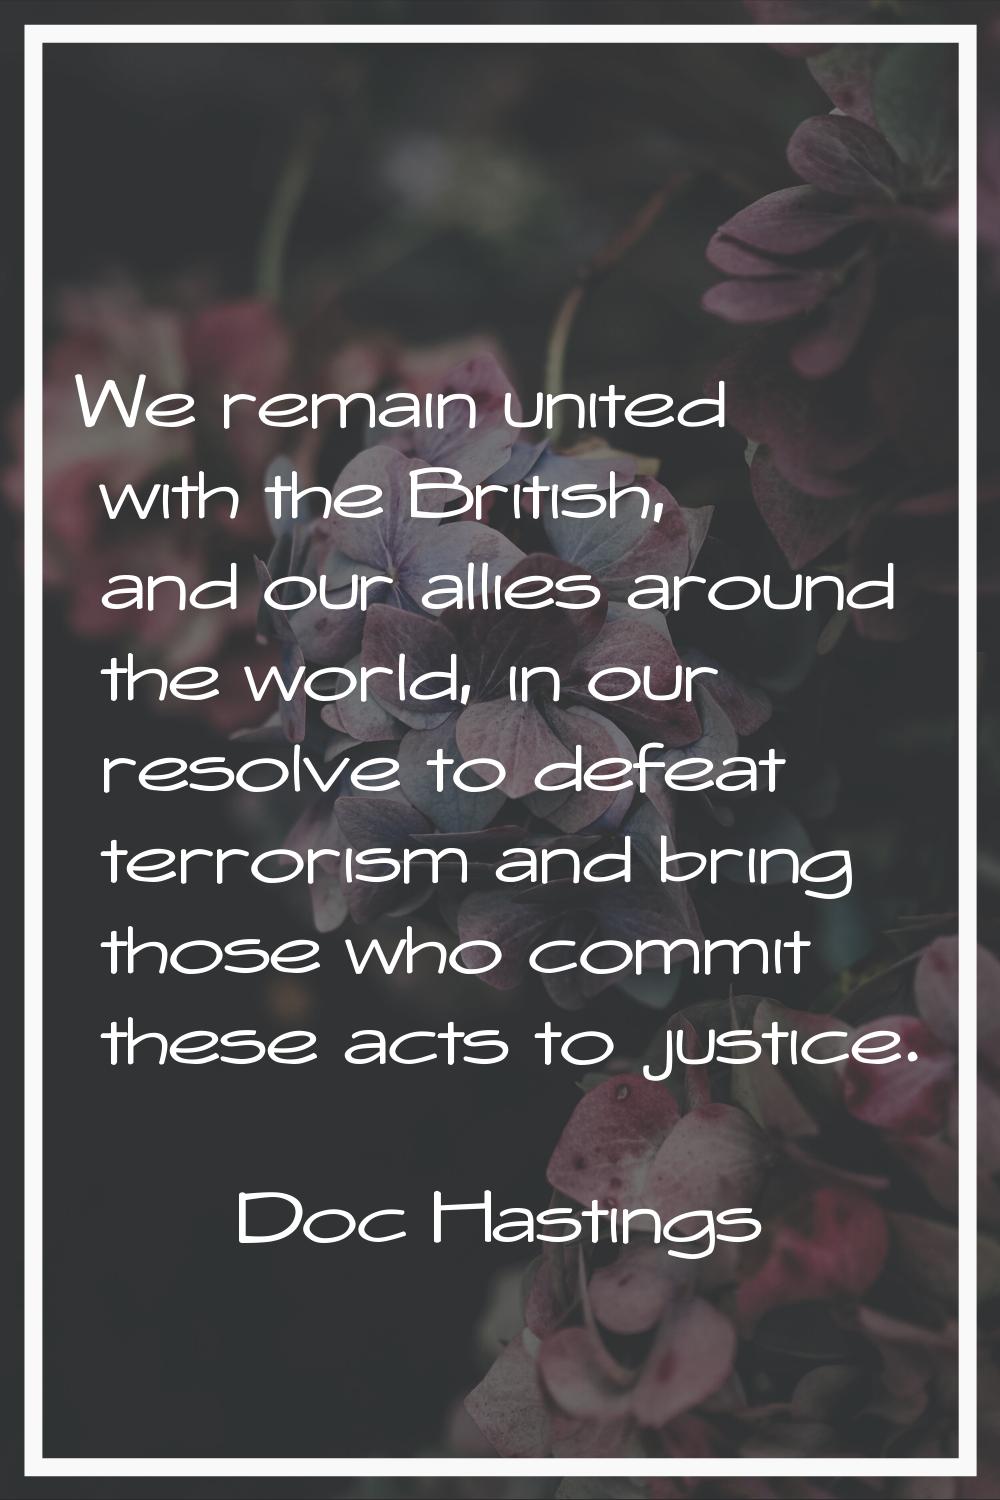 We remain united with the British, and our allies around the world, in our resolve to defeat terror